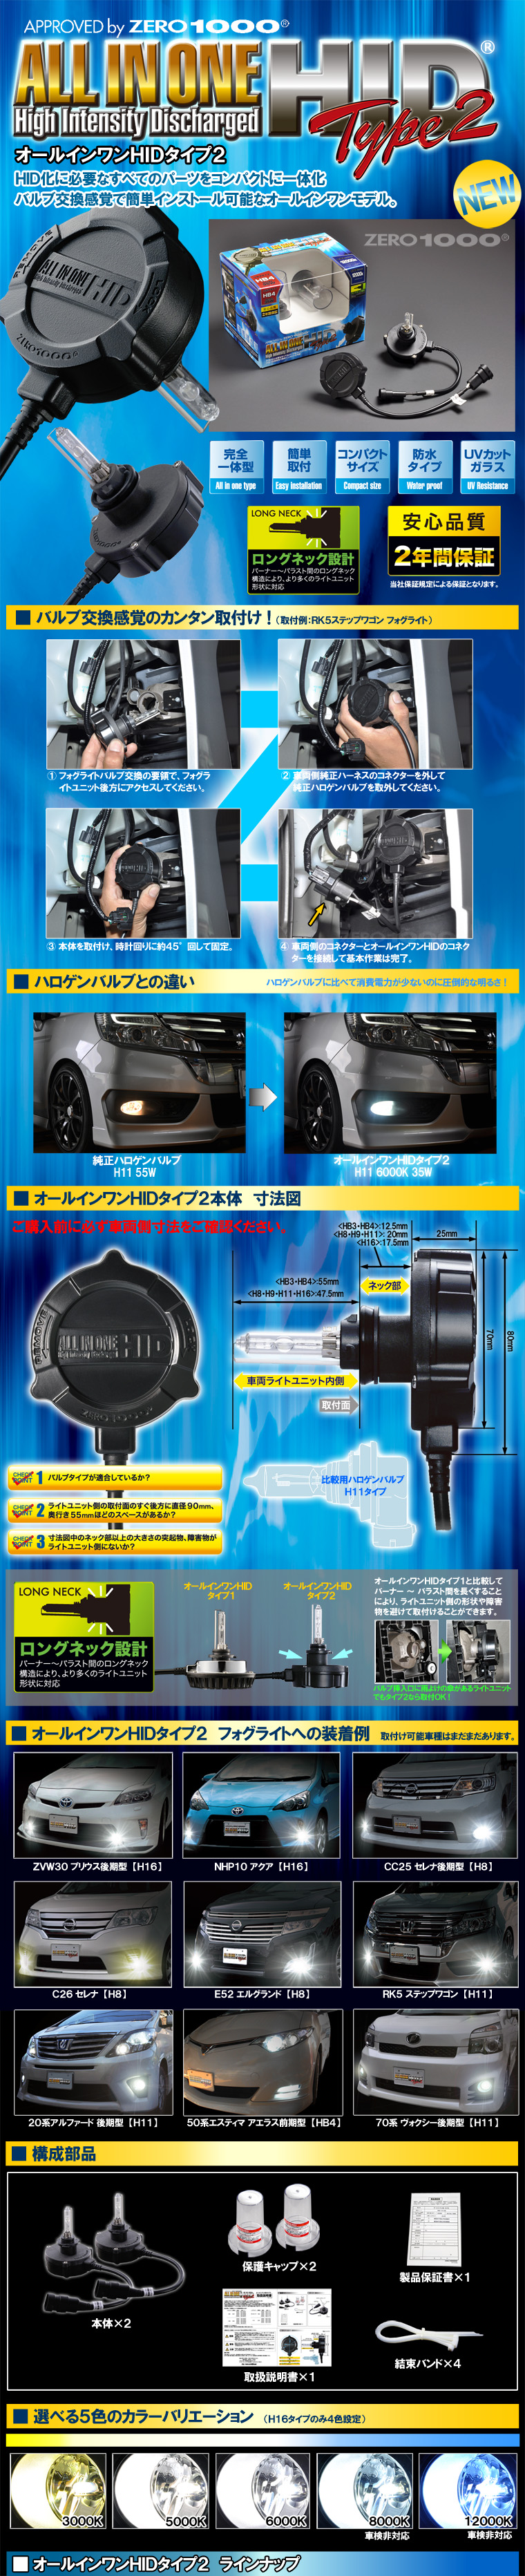 ZERO-1000/商品詳細 オールインワンHIDタイプ2 / ALL IN ONE HID TYPE-2